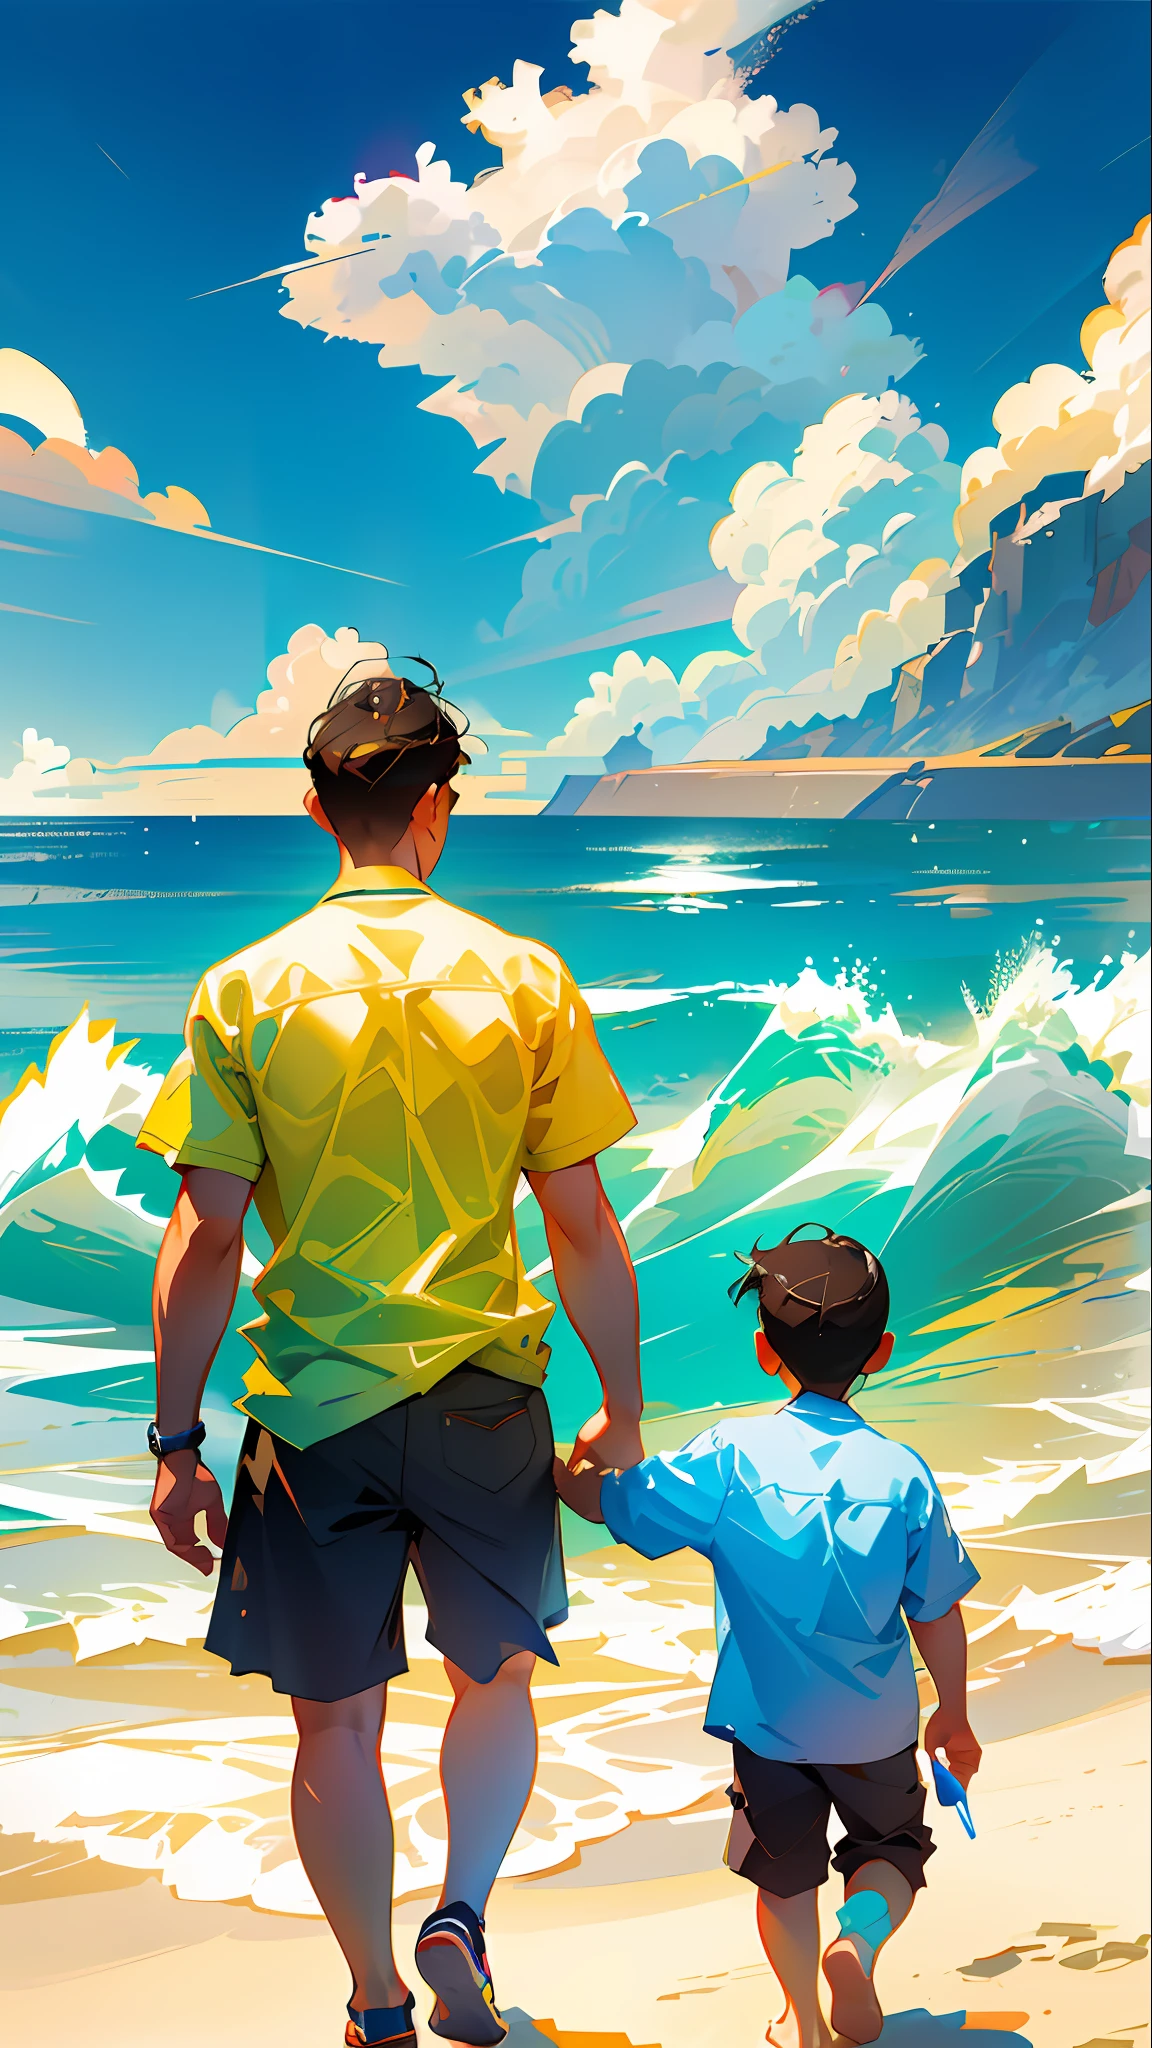 Illustration poster,, graphic illustration, Father's Day, Asian, middle-aged father and son,; The back of two people, shirt, middle-aged father leading the , seaside, sunny, blue sky and white clouds, sand, bright colors, high saturation, contour light, warm and bright, colorful, HD 8K--v6